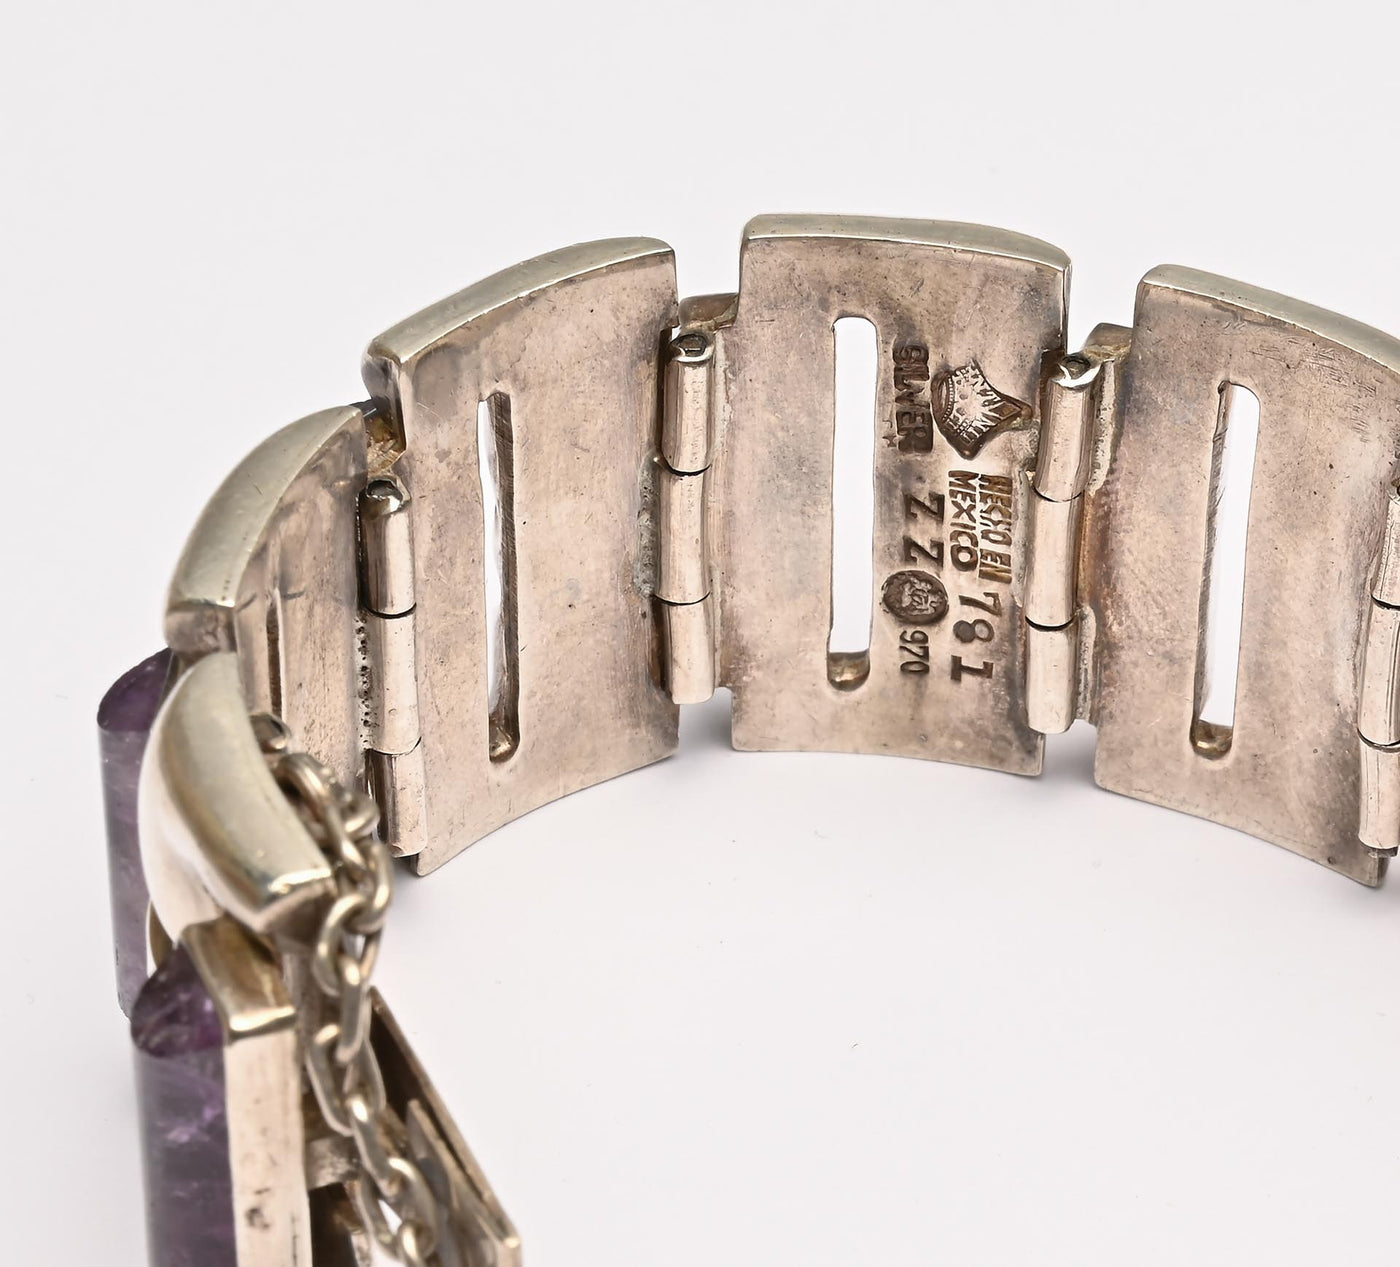 Silver bracelet showing stamps reading "Mexico," "SS 970," and "781"